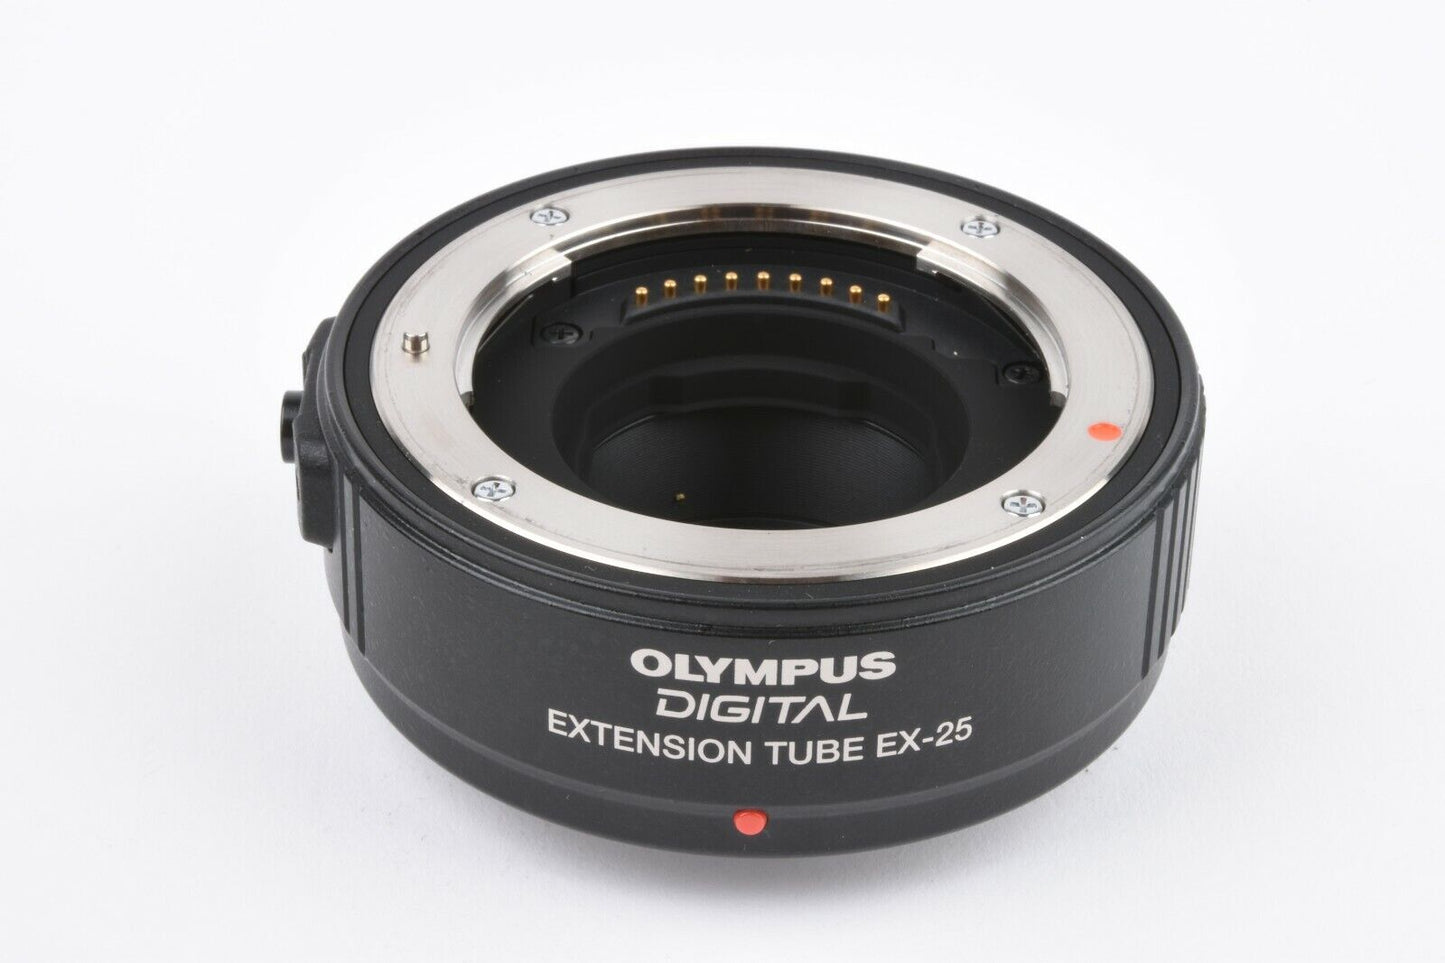 MINT IN CASE OLYMPUS DIGITAL EXTENSION TUBE EX-25, BARELY EVER USED, CAPS